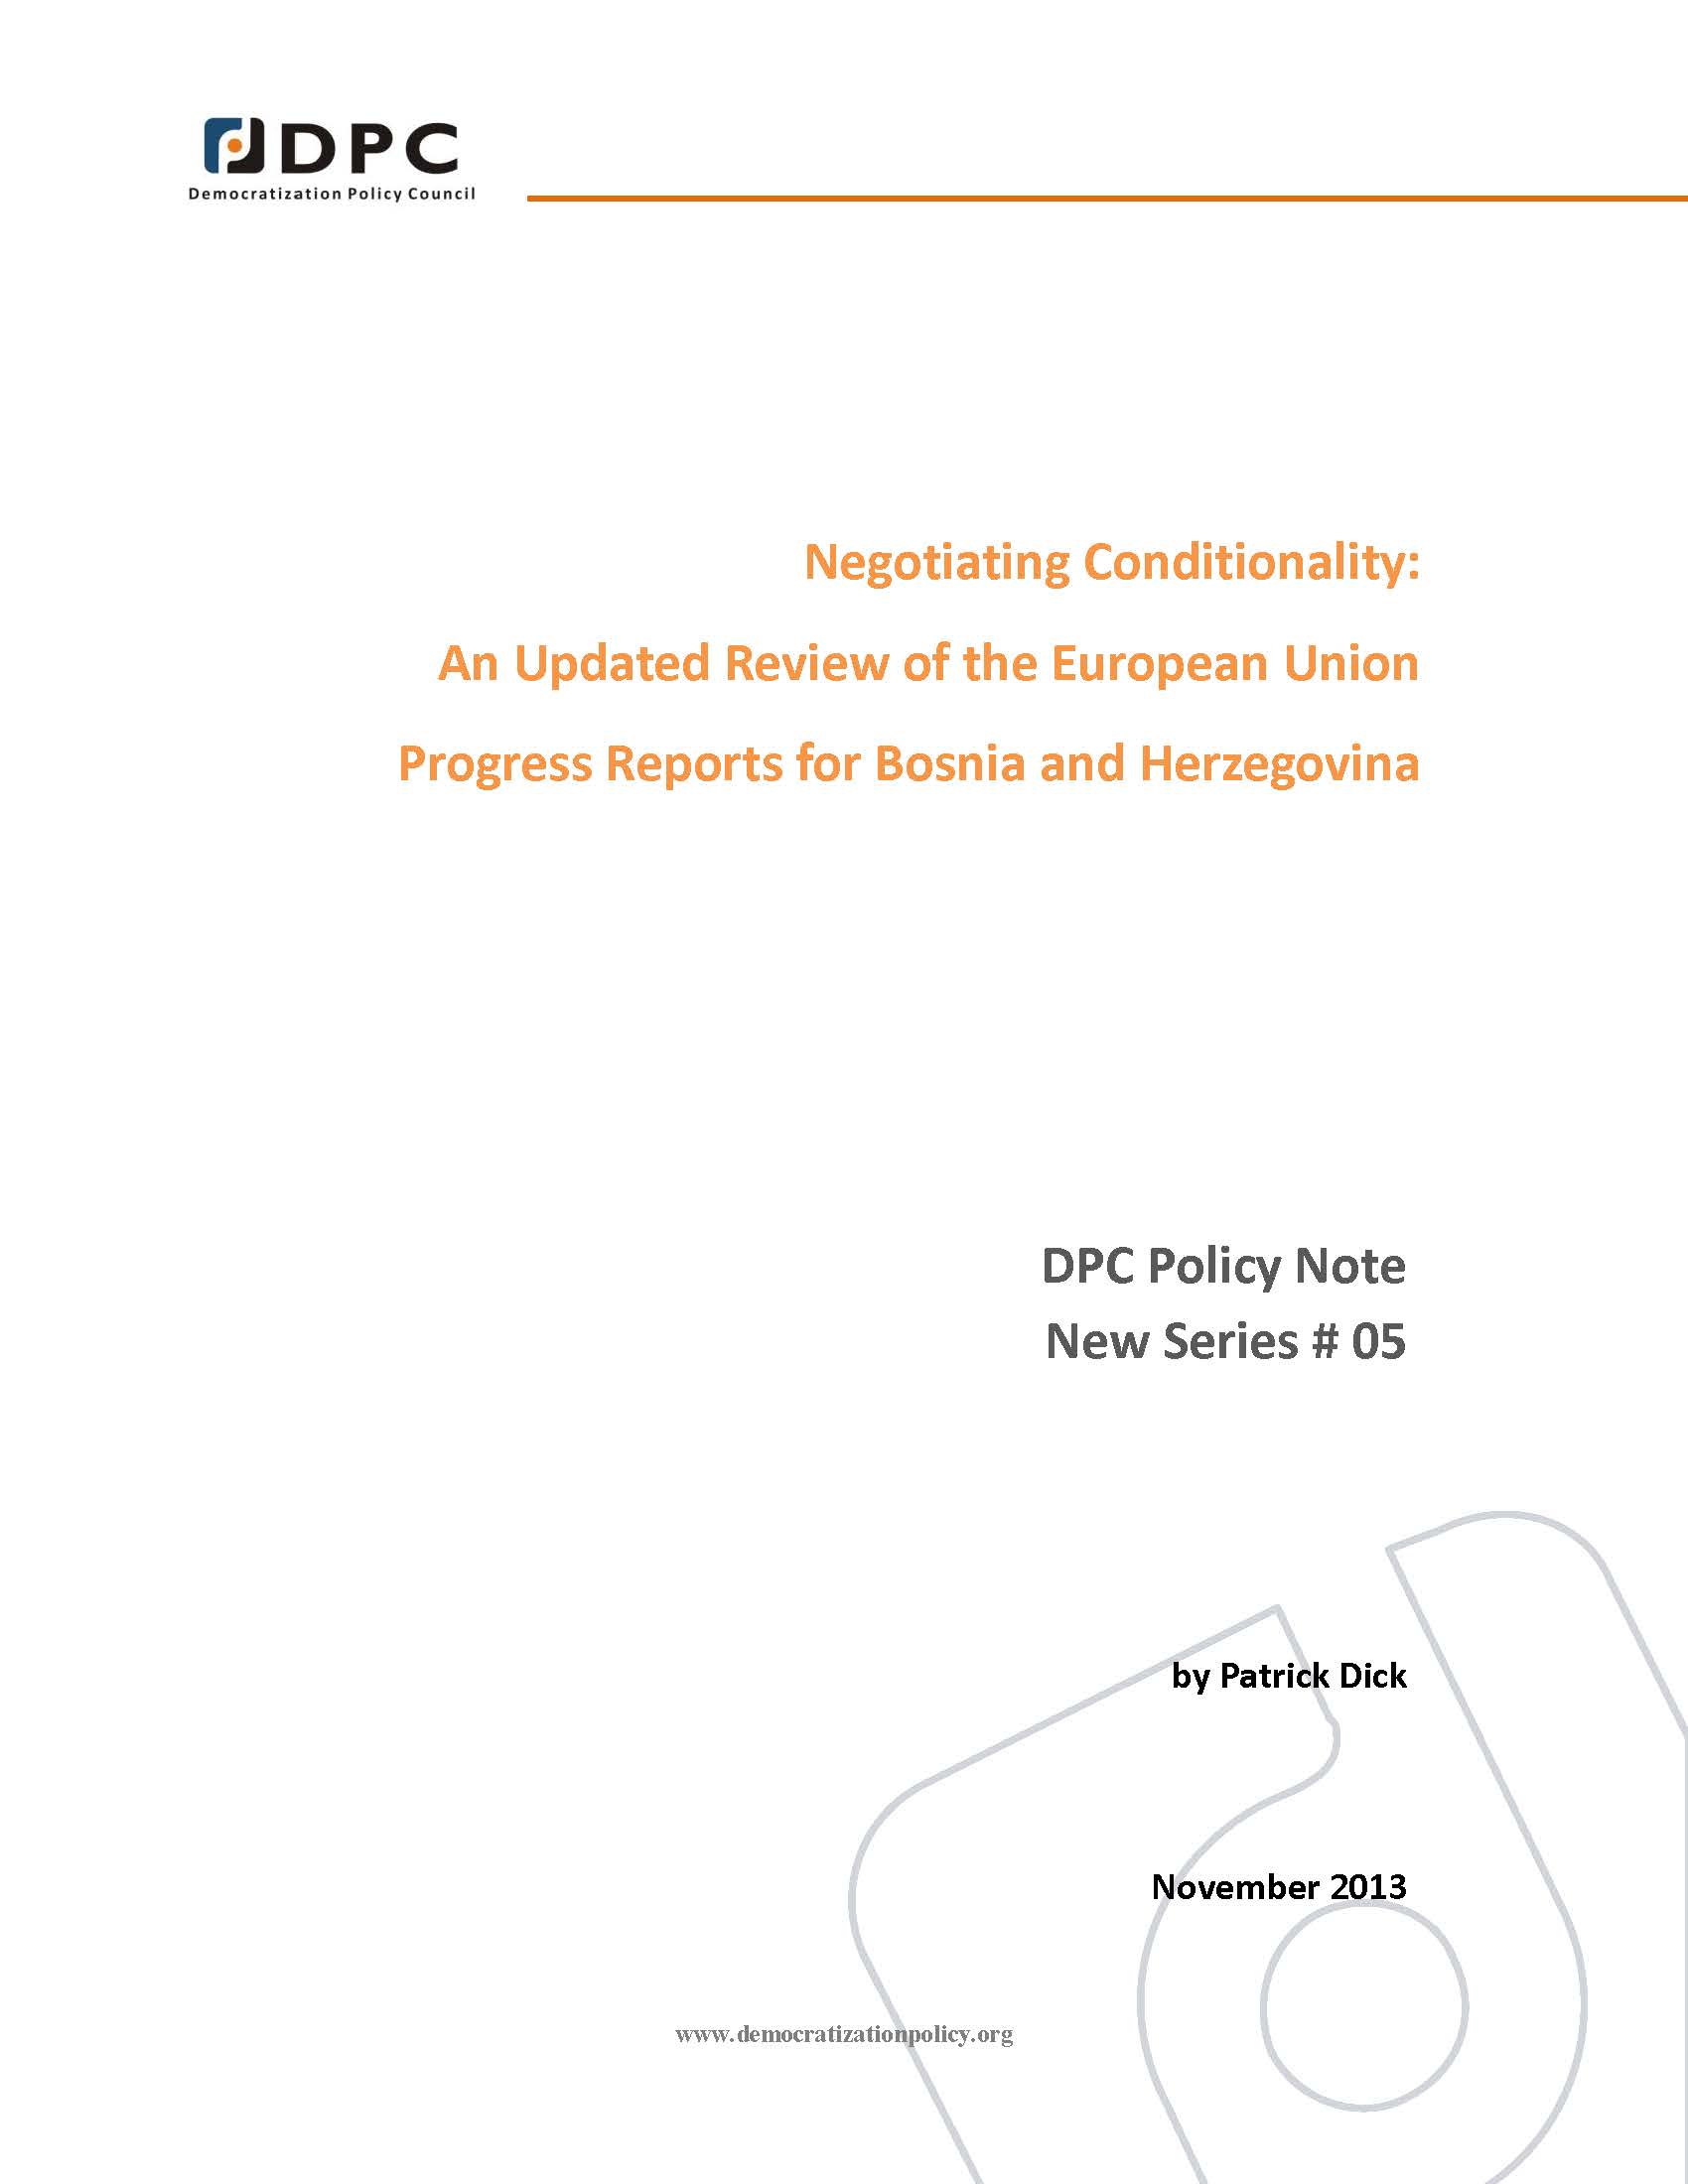 DPC POLICY NOTE 05: Negotiating Conditionality: An Updated Review of the European Union Progress Reports for Bosnia and Herzegovina. Cover Image